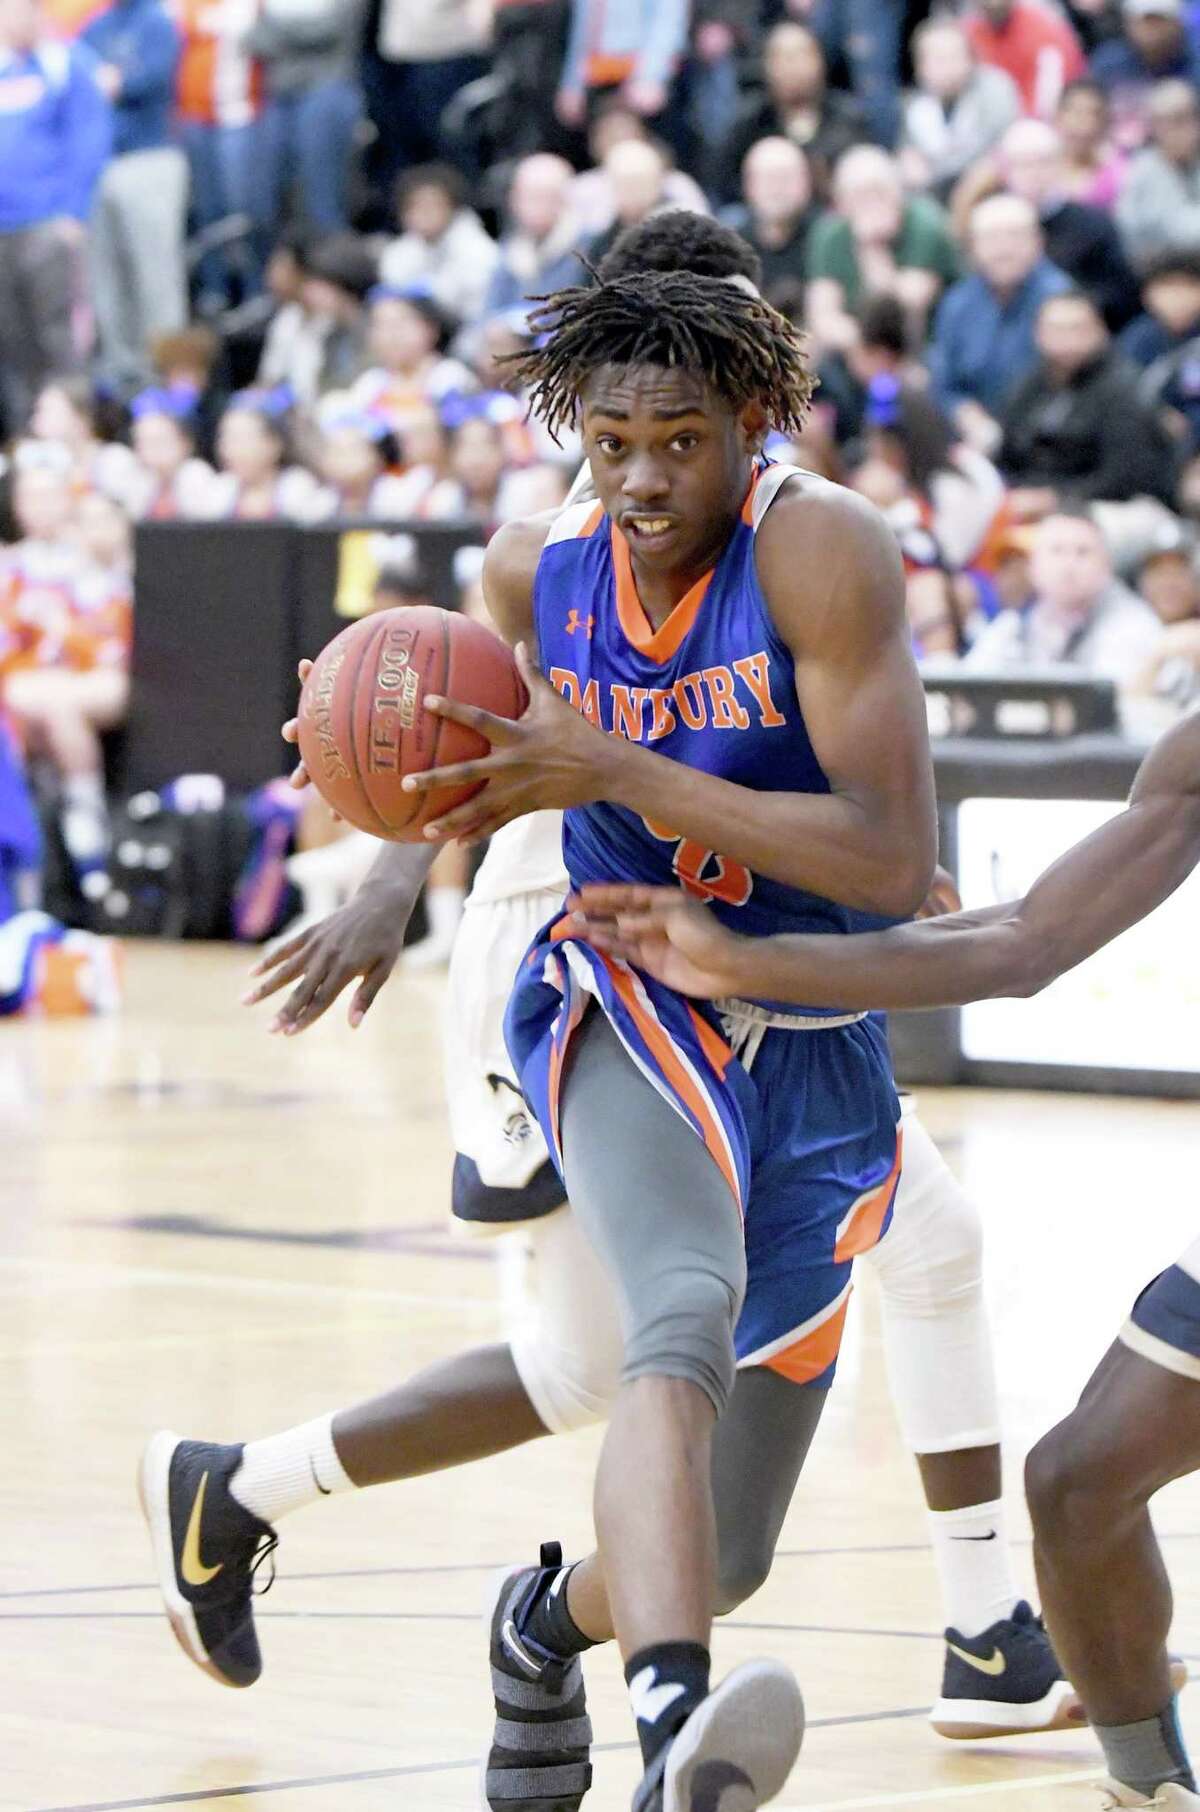 Danbury’s Denali Burton has helped lead the Hatters into the Division I state tournament quarterfinals each of the last three seasons.